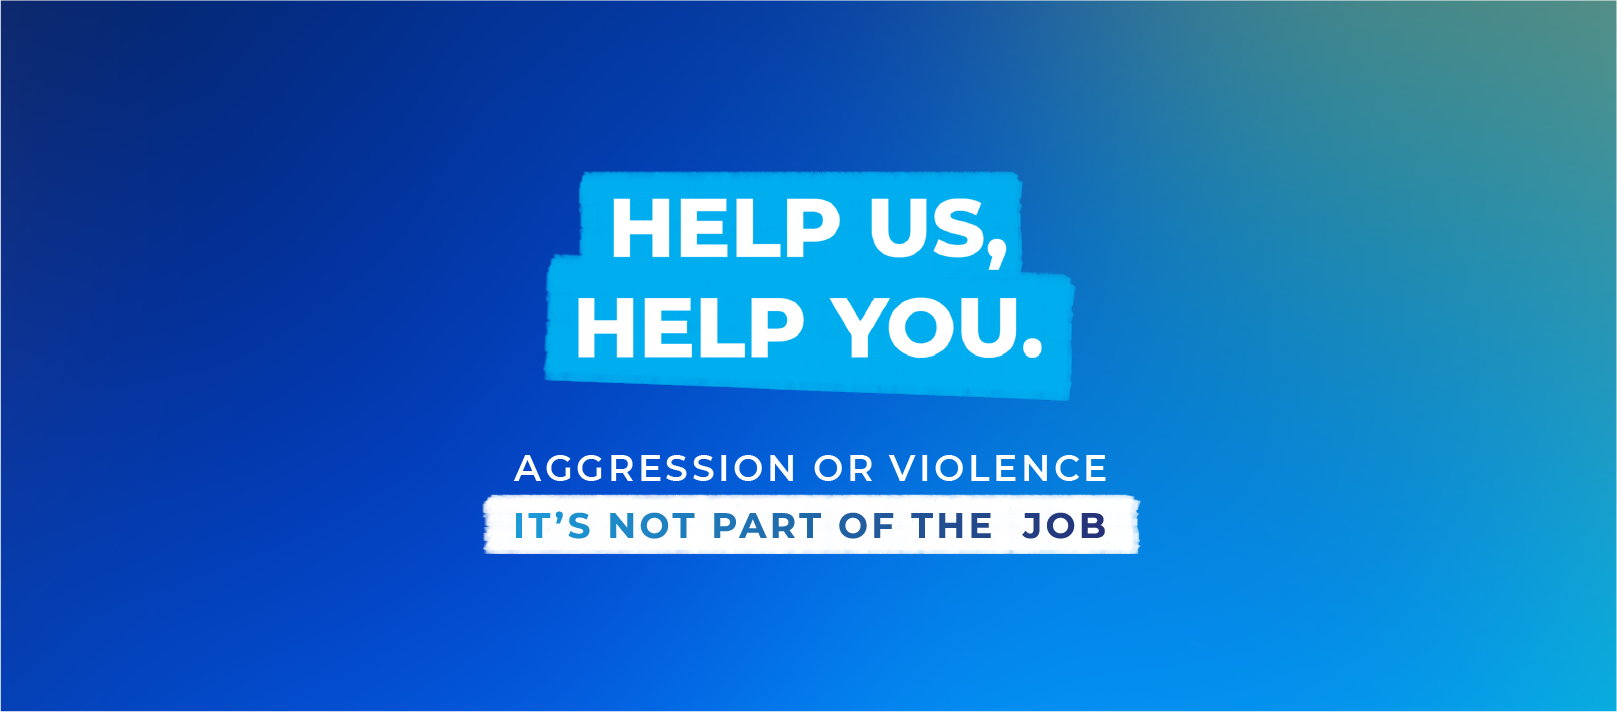 Help Us, Help You poster stating aggression or violence is not part of the job